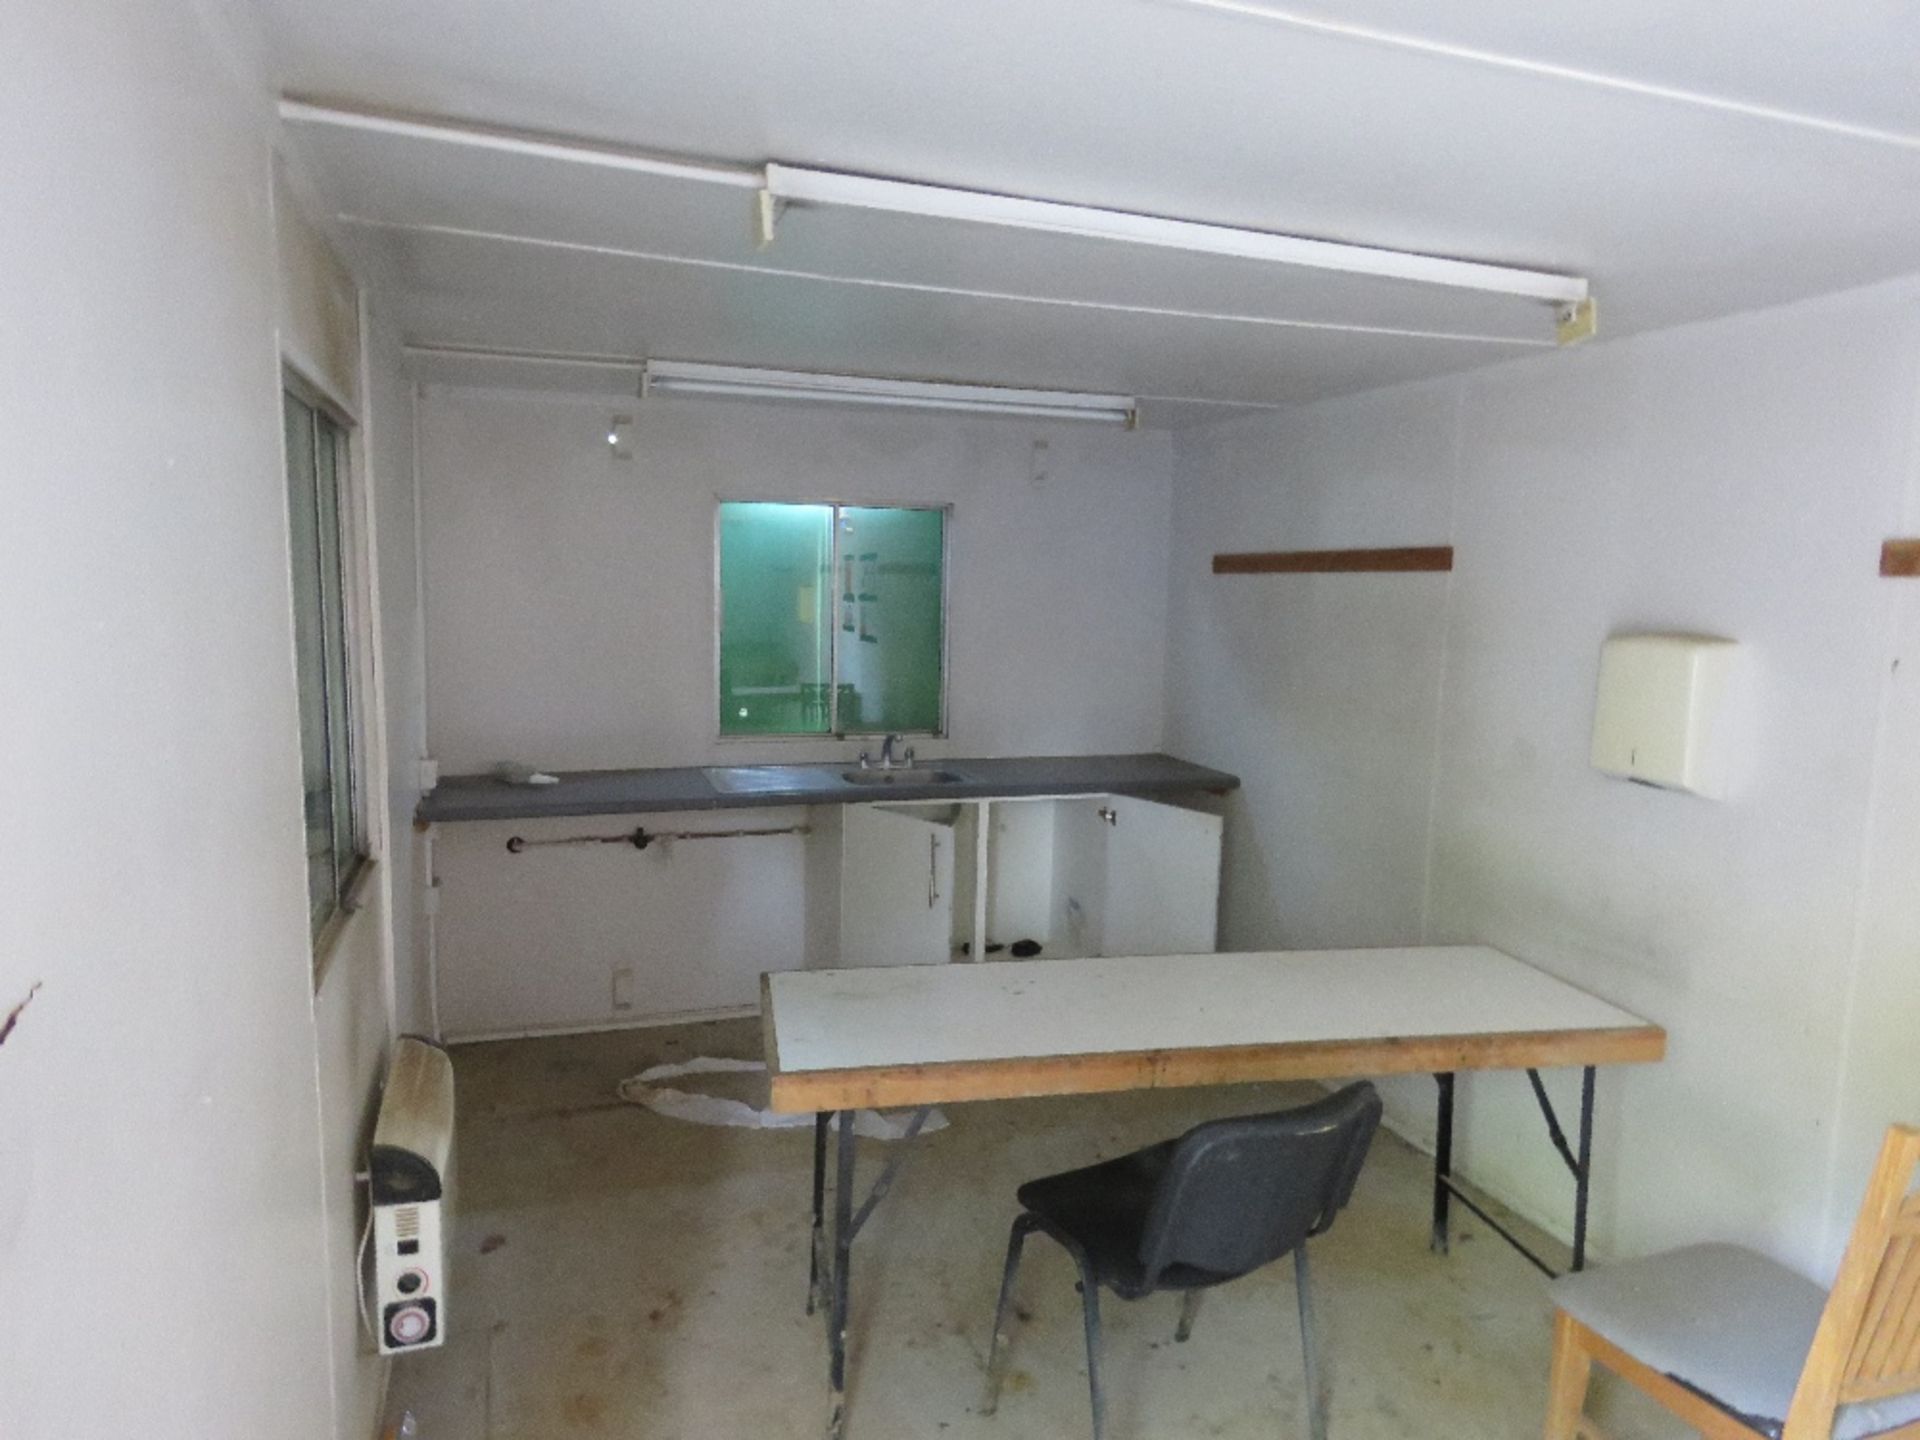 SECURE STEEL SITE OFFICE / CANTEEN, OPEN PLAN LAYOUT WITH KITCHEN AREA AT ONE END. 32FT LENGTH X 10 - Image 5 of 12